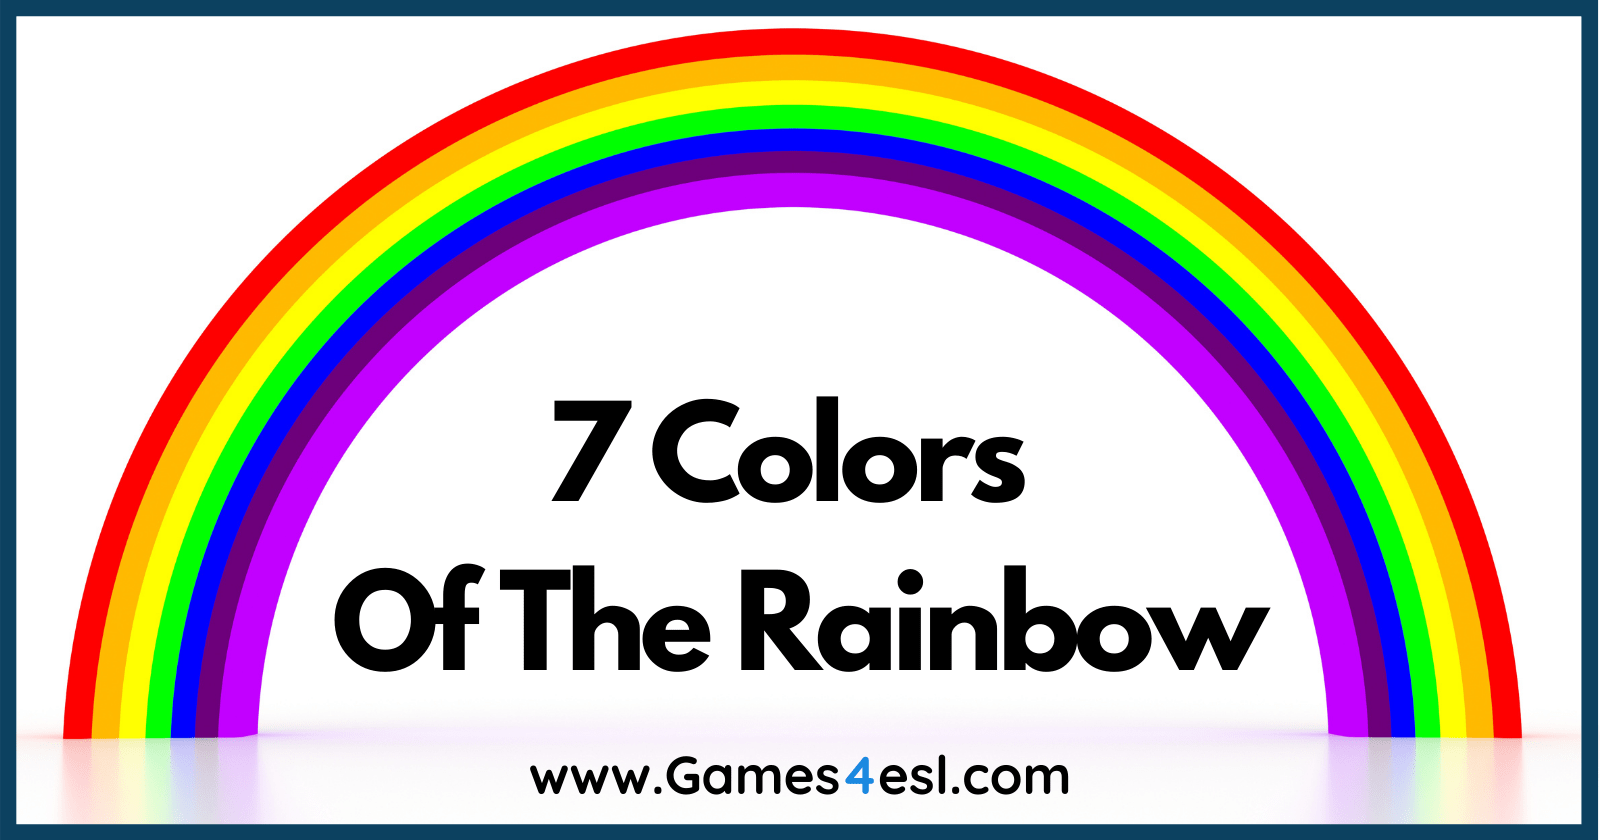 what are the 7 rainbow colours in order